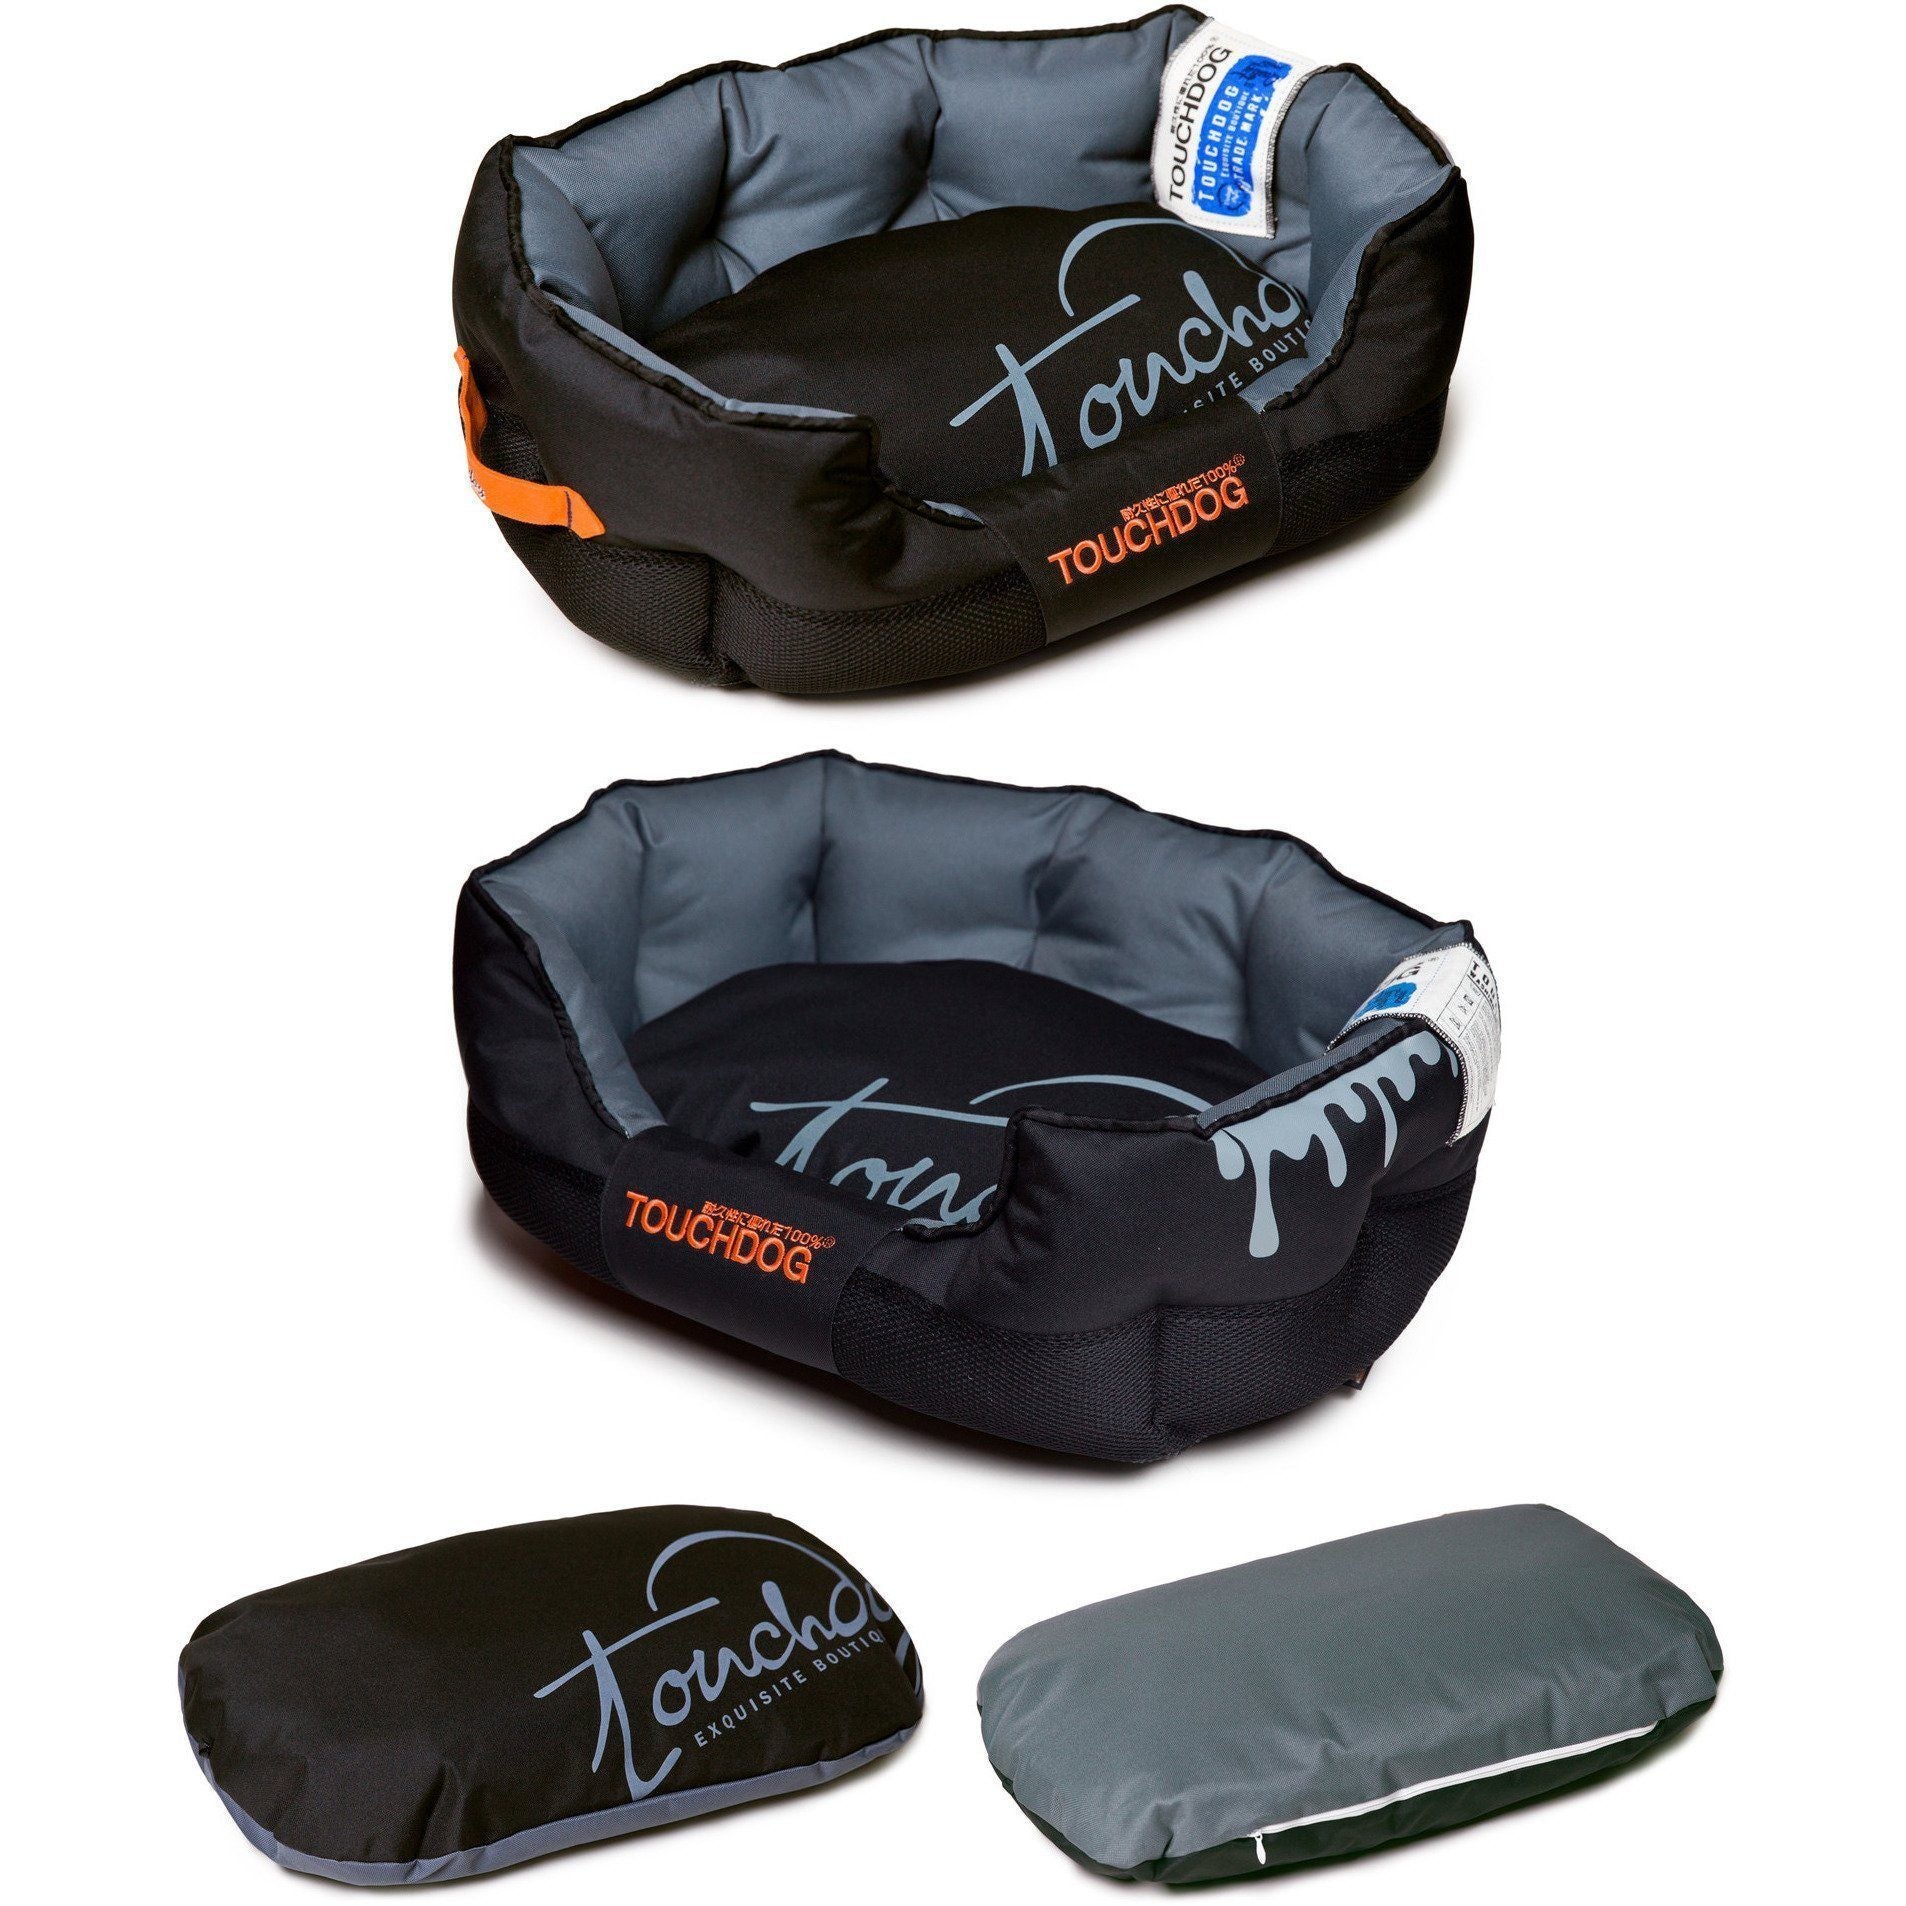 Touchdog ® 'Performance-Max' Sporty Reflective Water-Resistant Dog Bed  